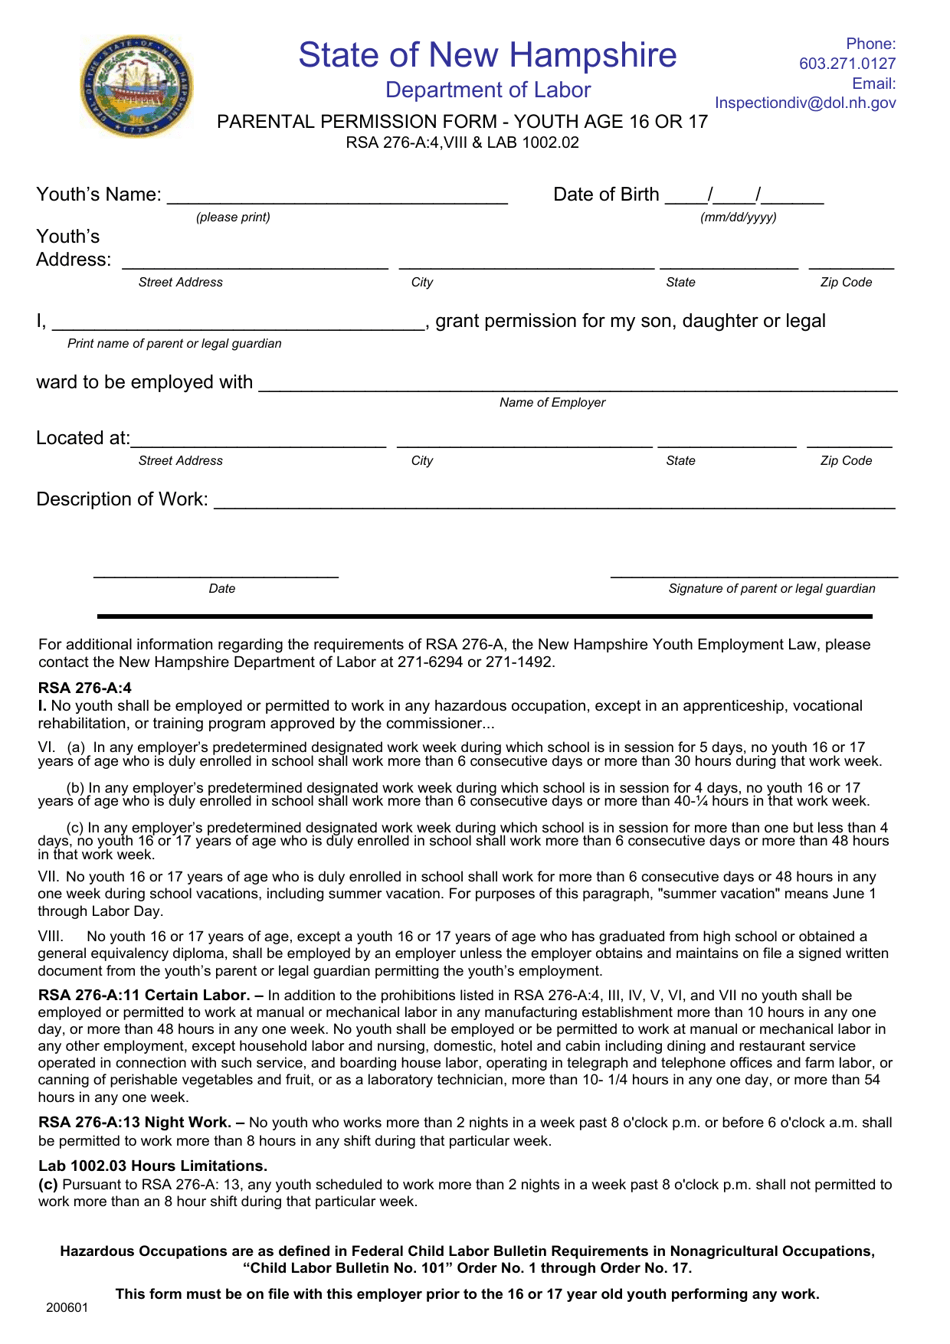 Parental Permission Form - Youth Age 16 or 17 - New Hampshire, Page 1